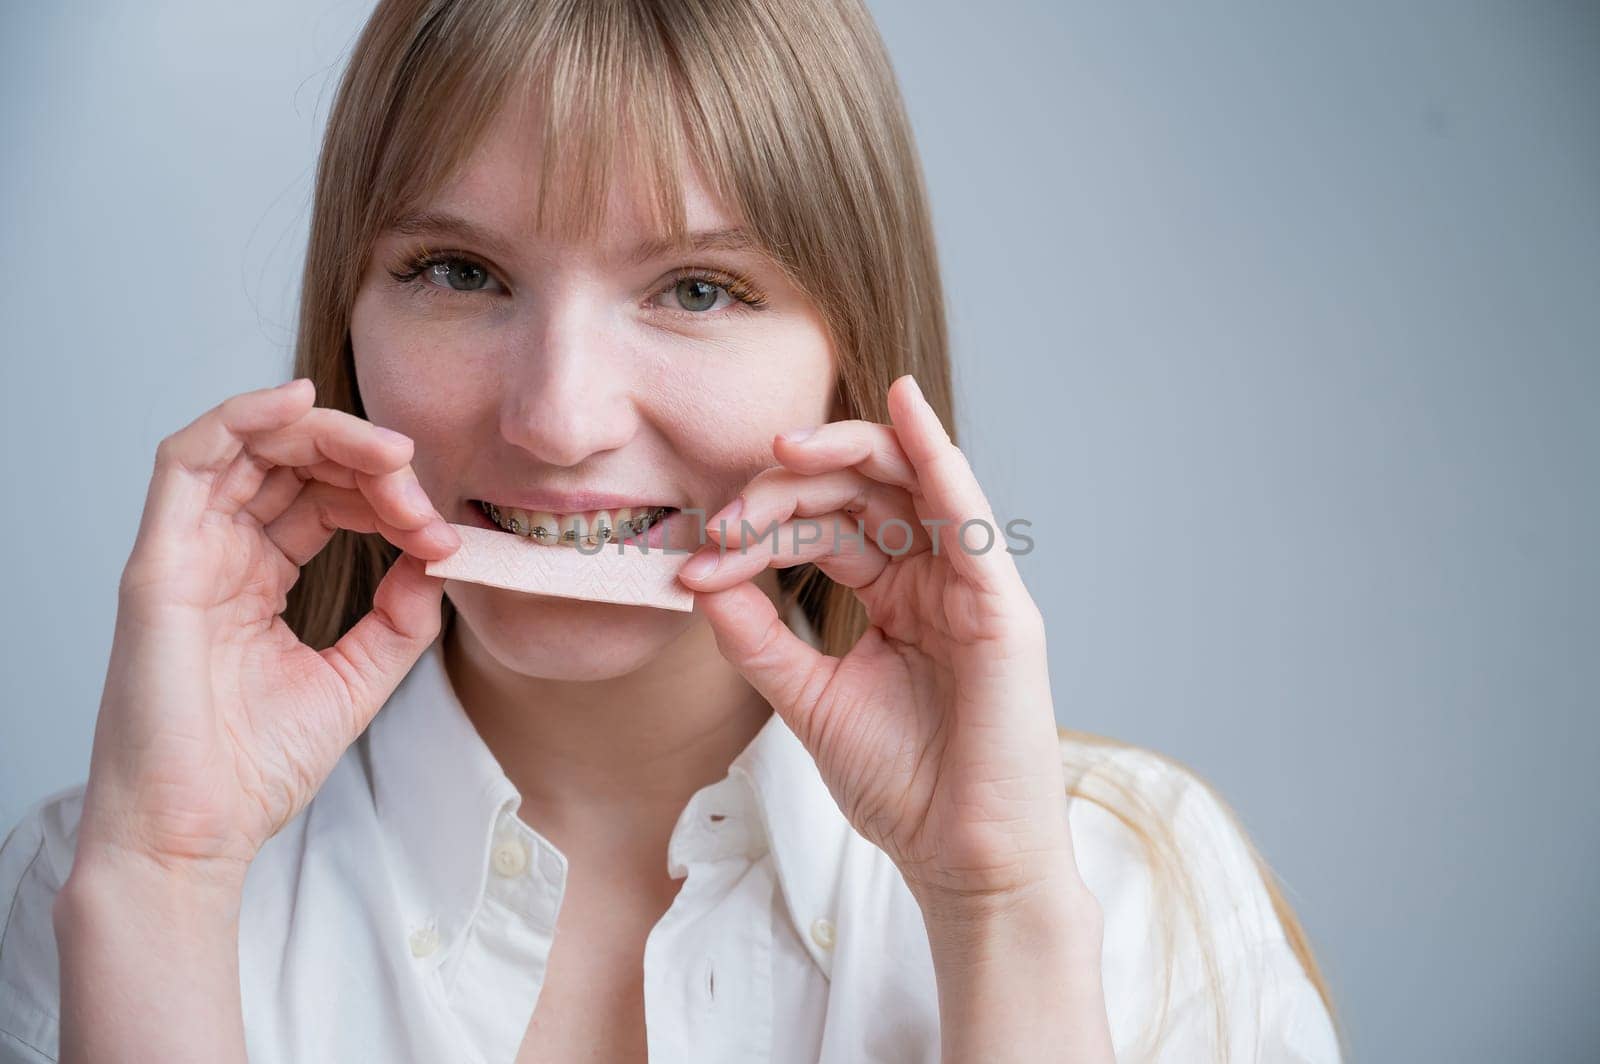 Young woman with metal braces on her teeth is chewing gum. The girl is eating gummy candy.